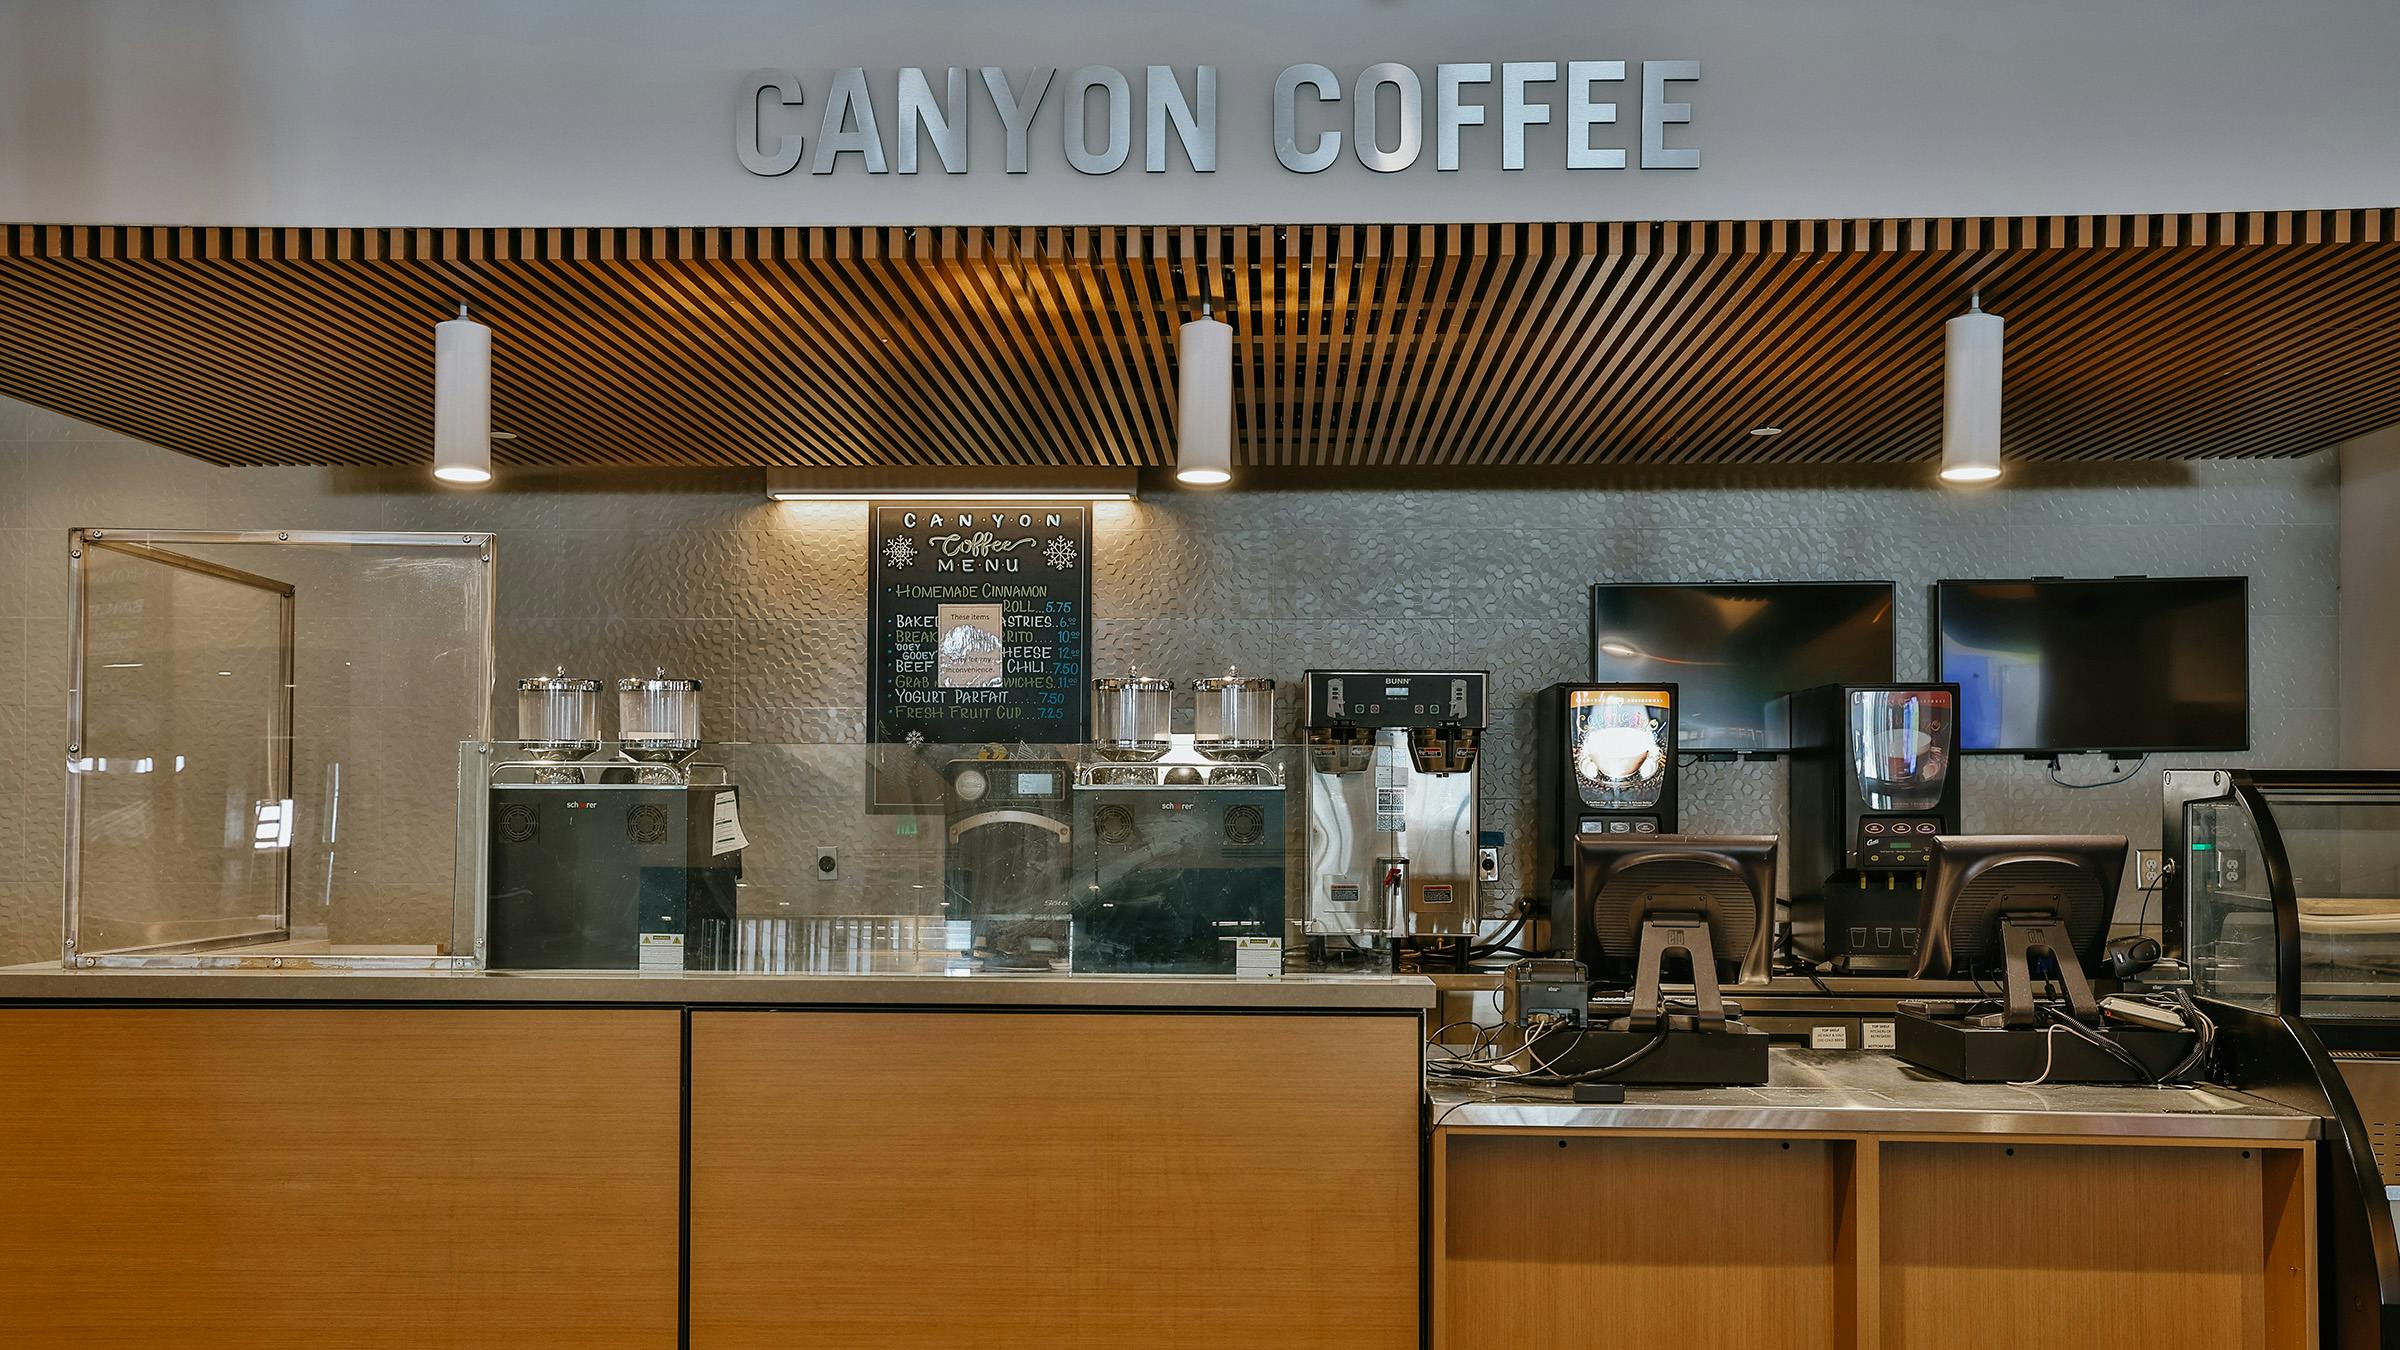 Canyon Coffee shop with cash register and checkout